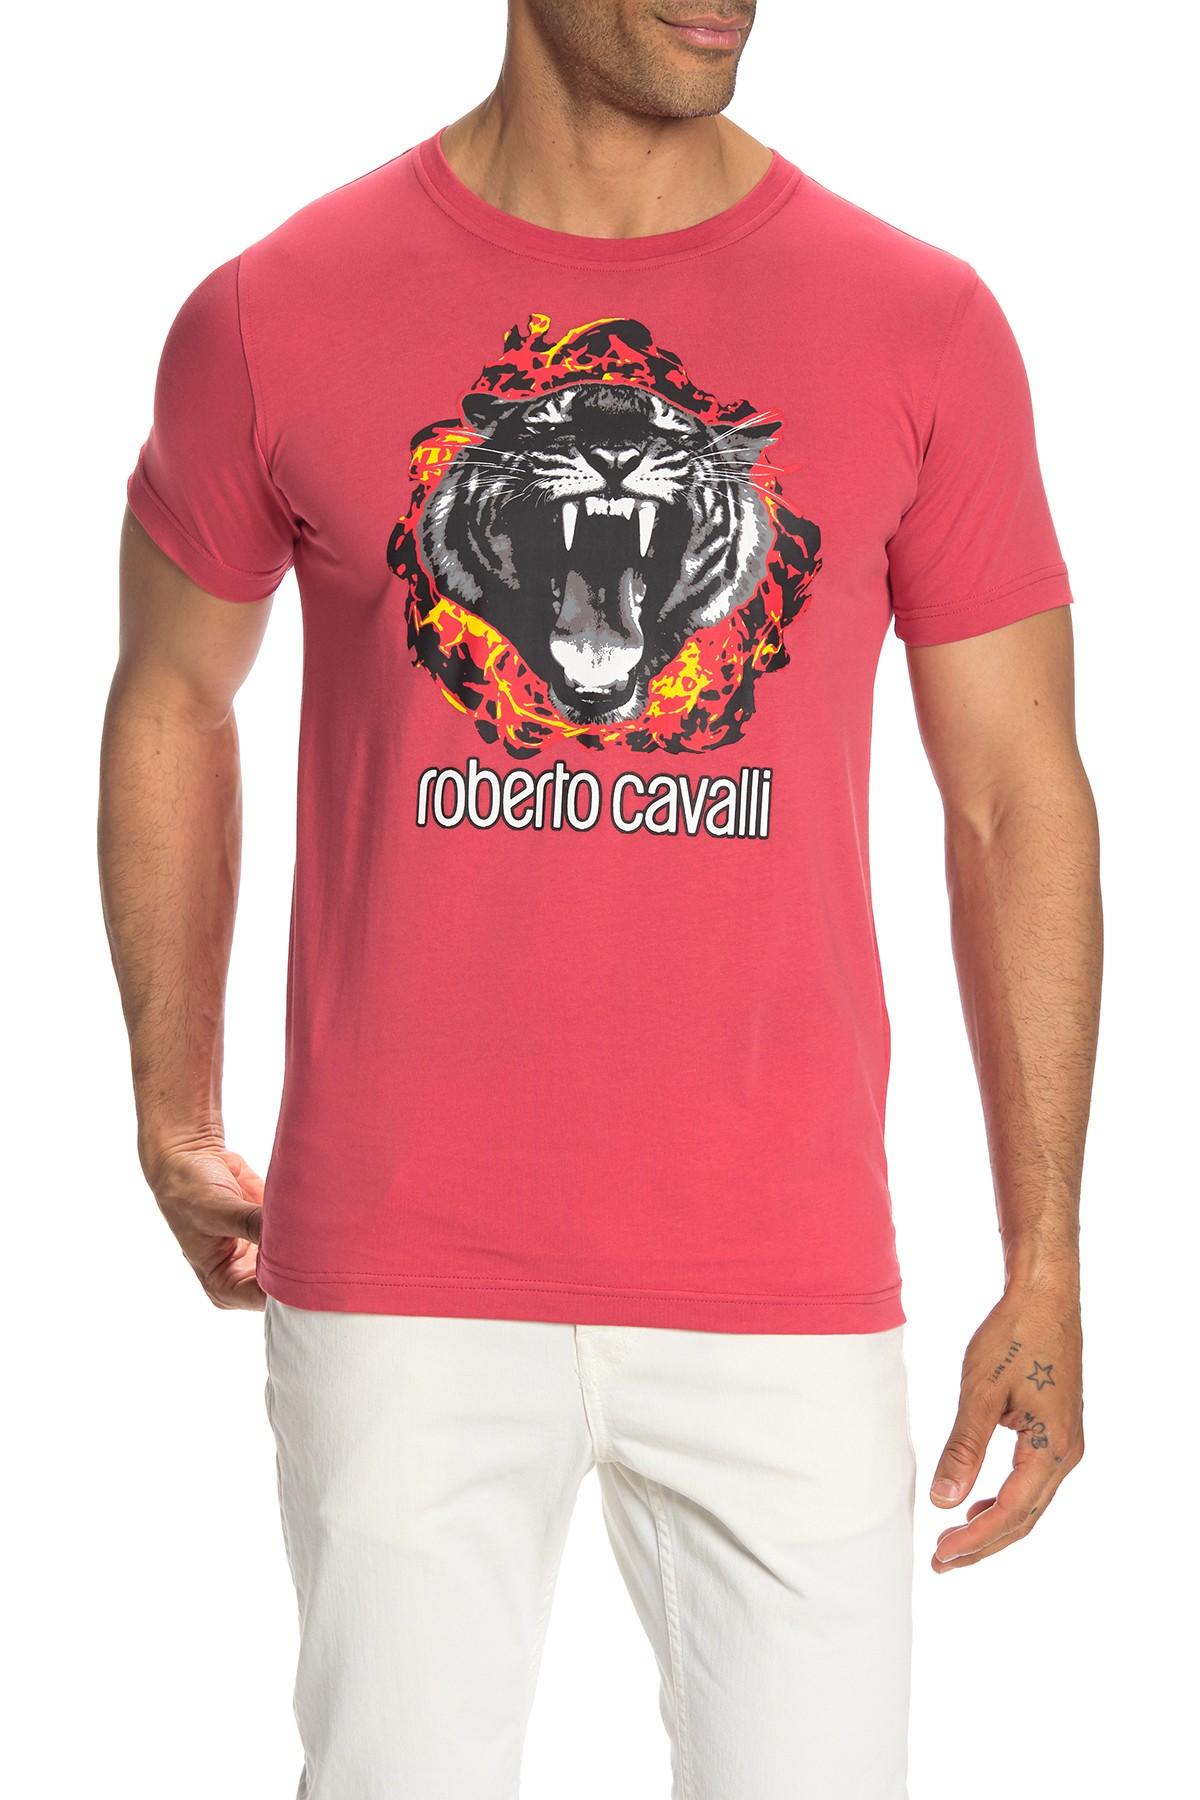 Roberto Cavalli Fire Tiger T-shirt in Red for Men - Lyst